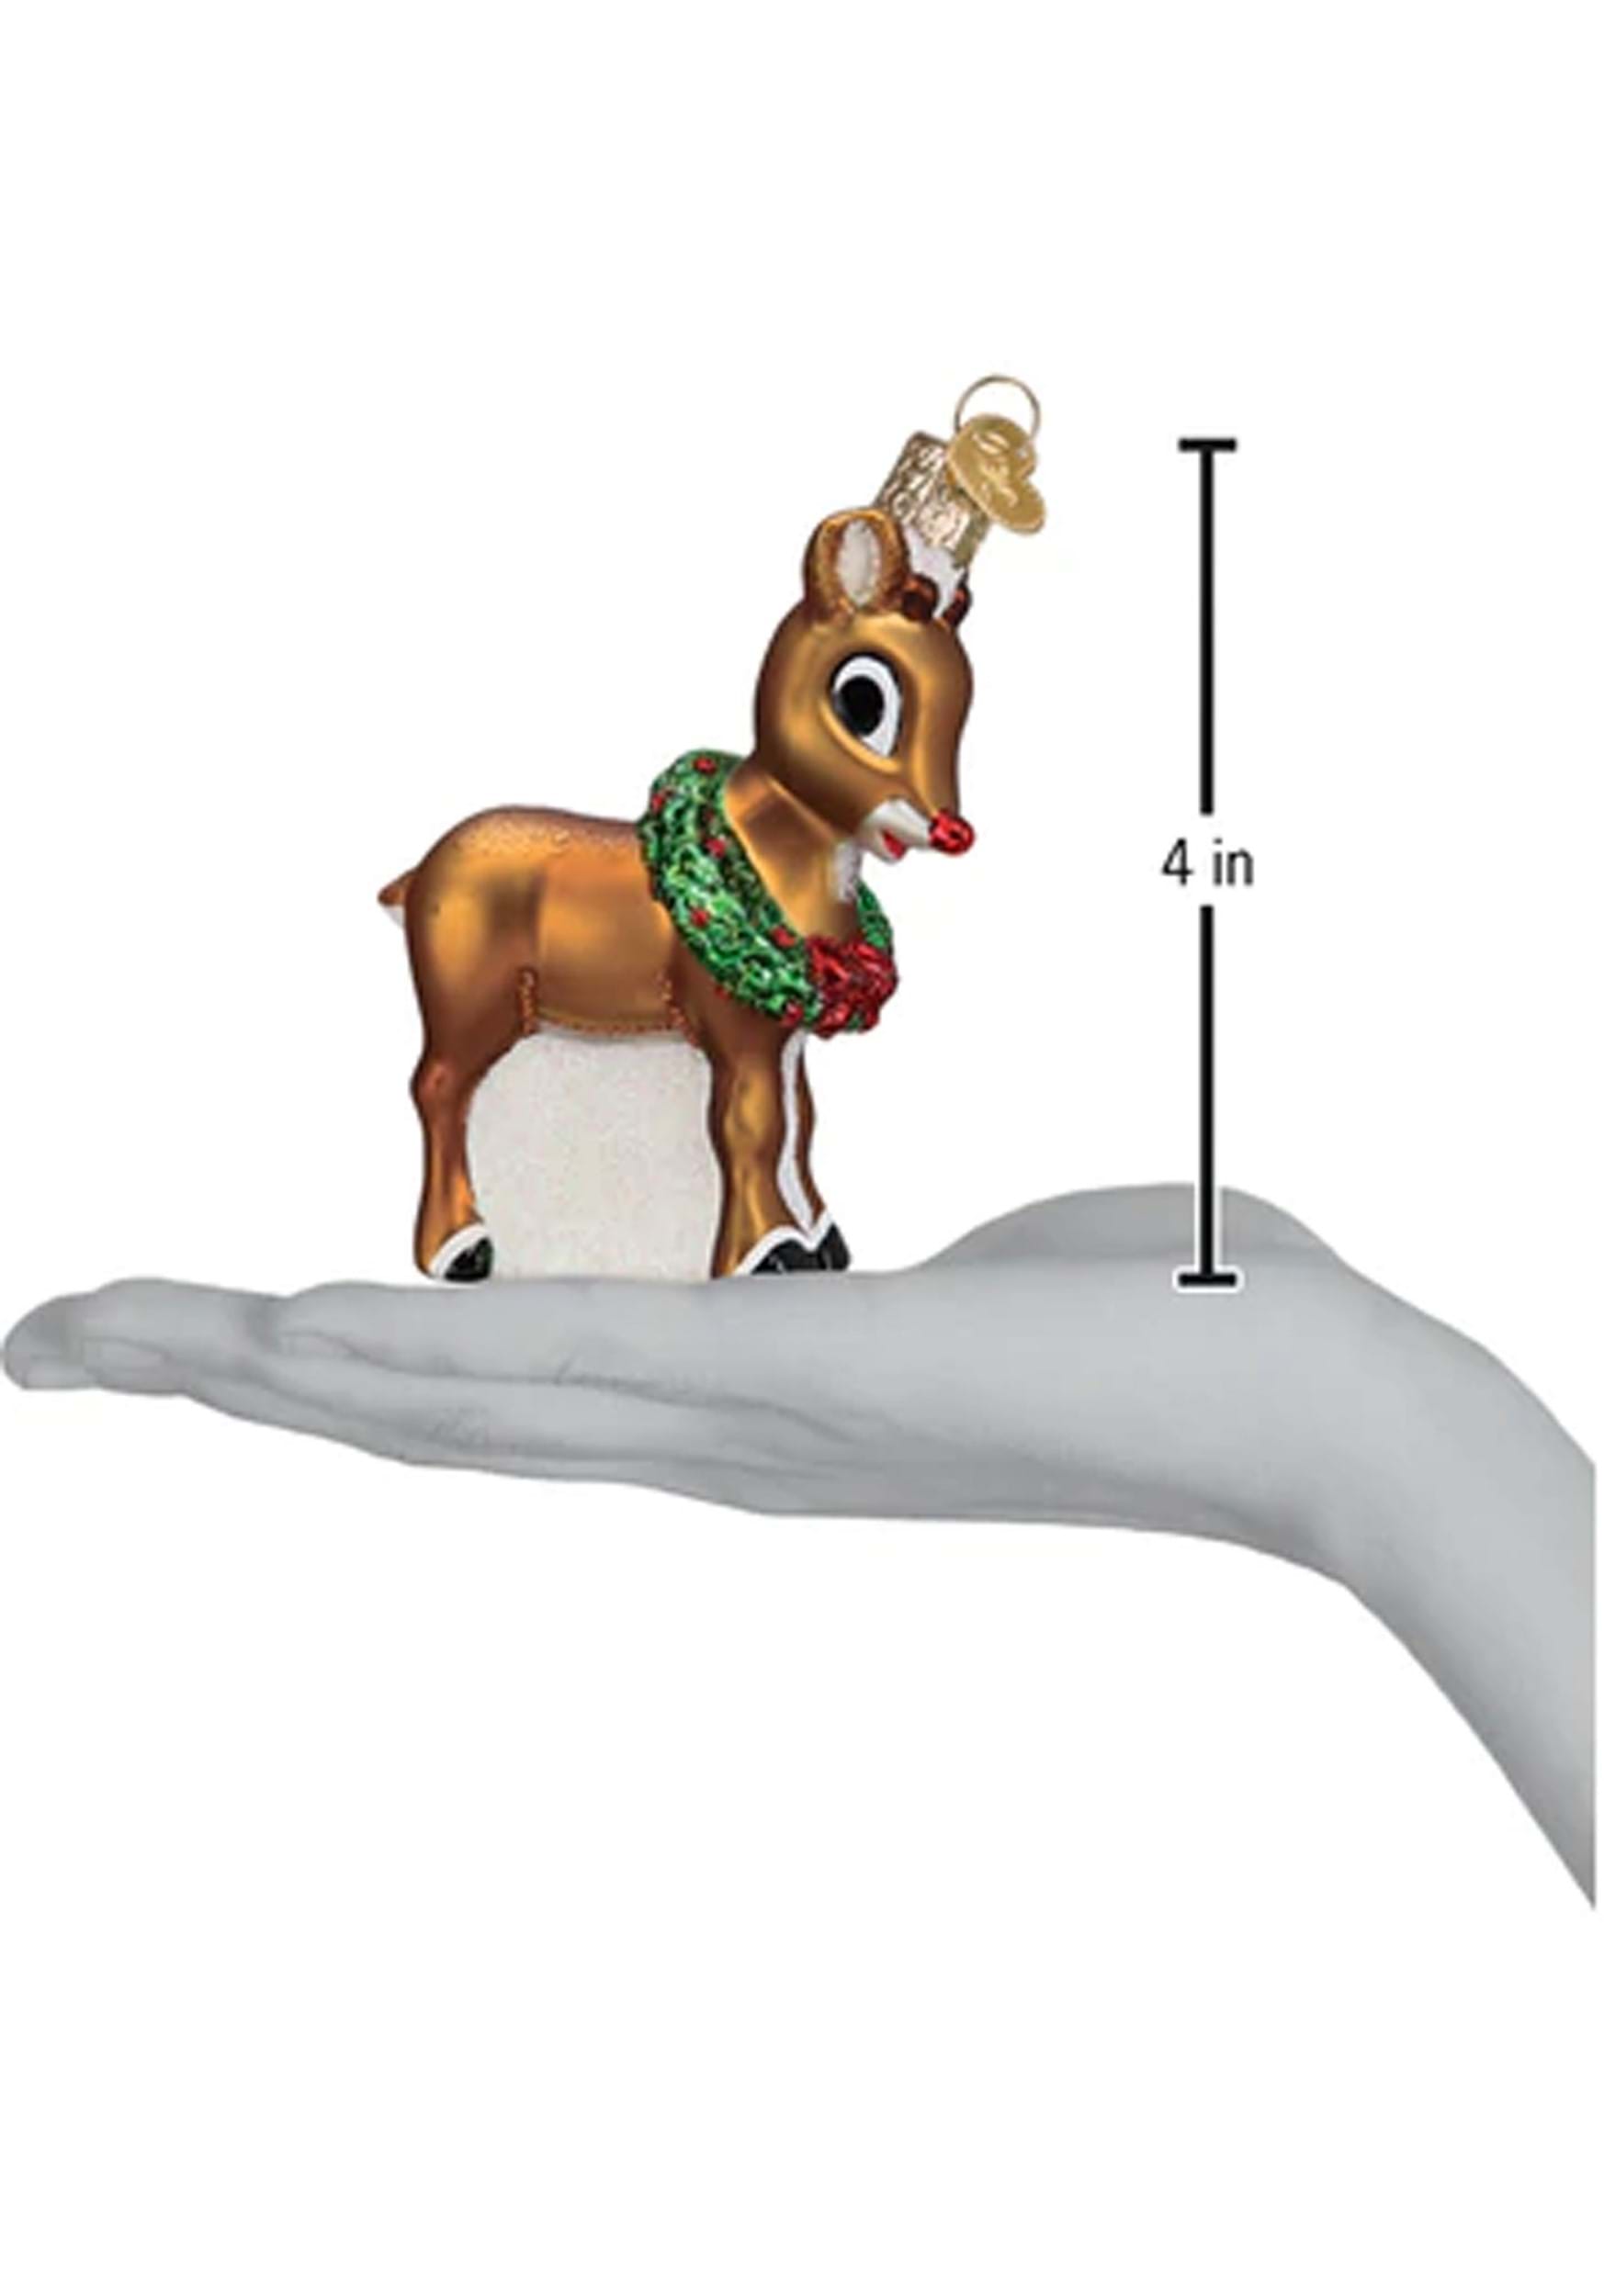 Rudolph The Red-Nosed Reindeer Holiday Ornament